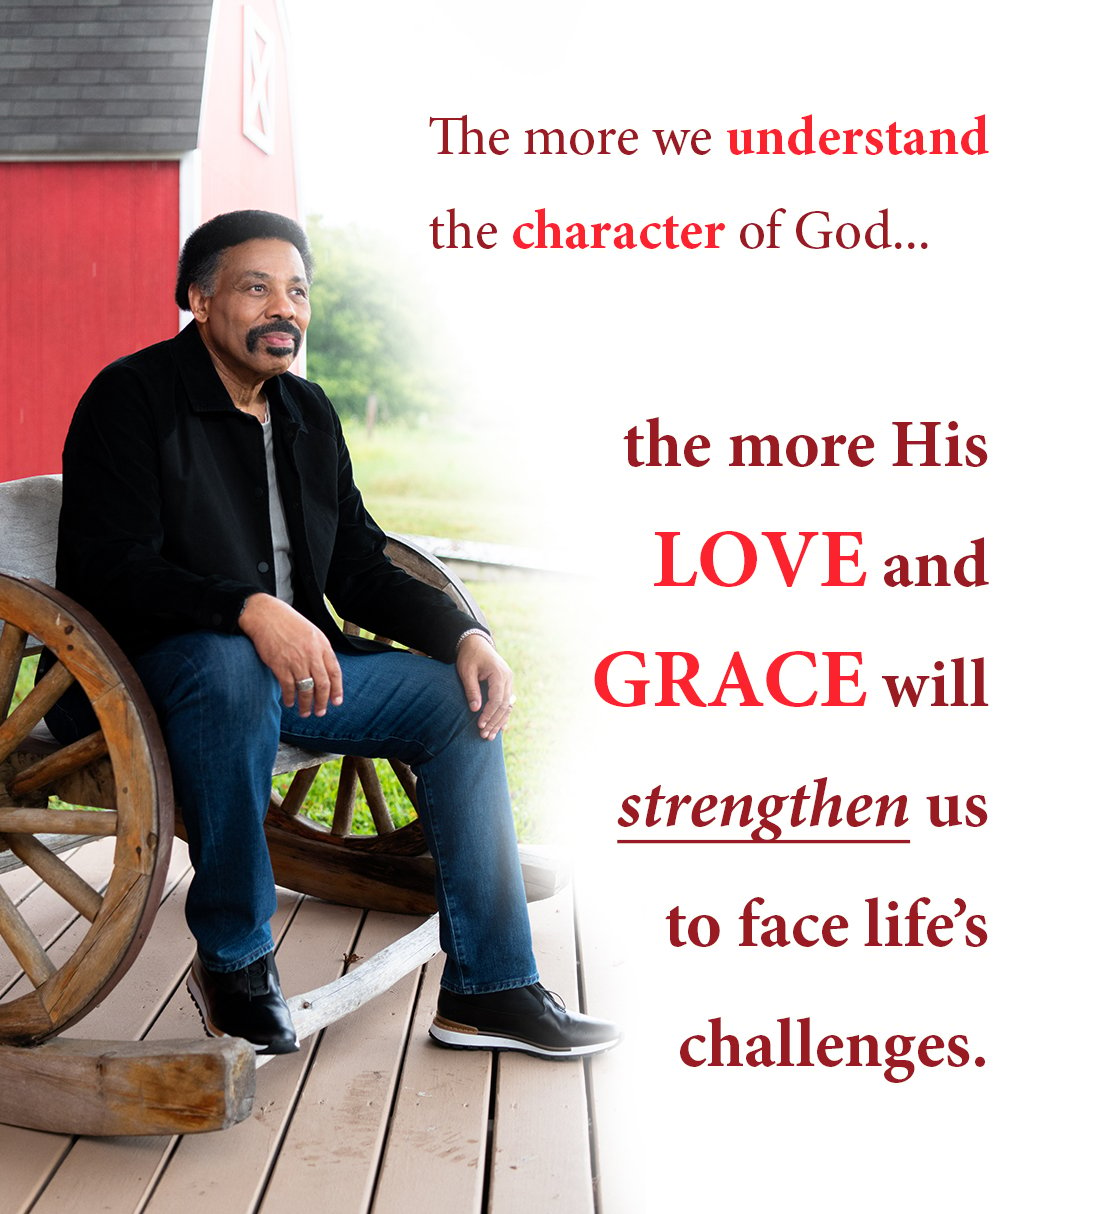 The more we understand the character of God, the more His love and grace will strengthen us to face life's challenges.